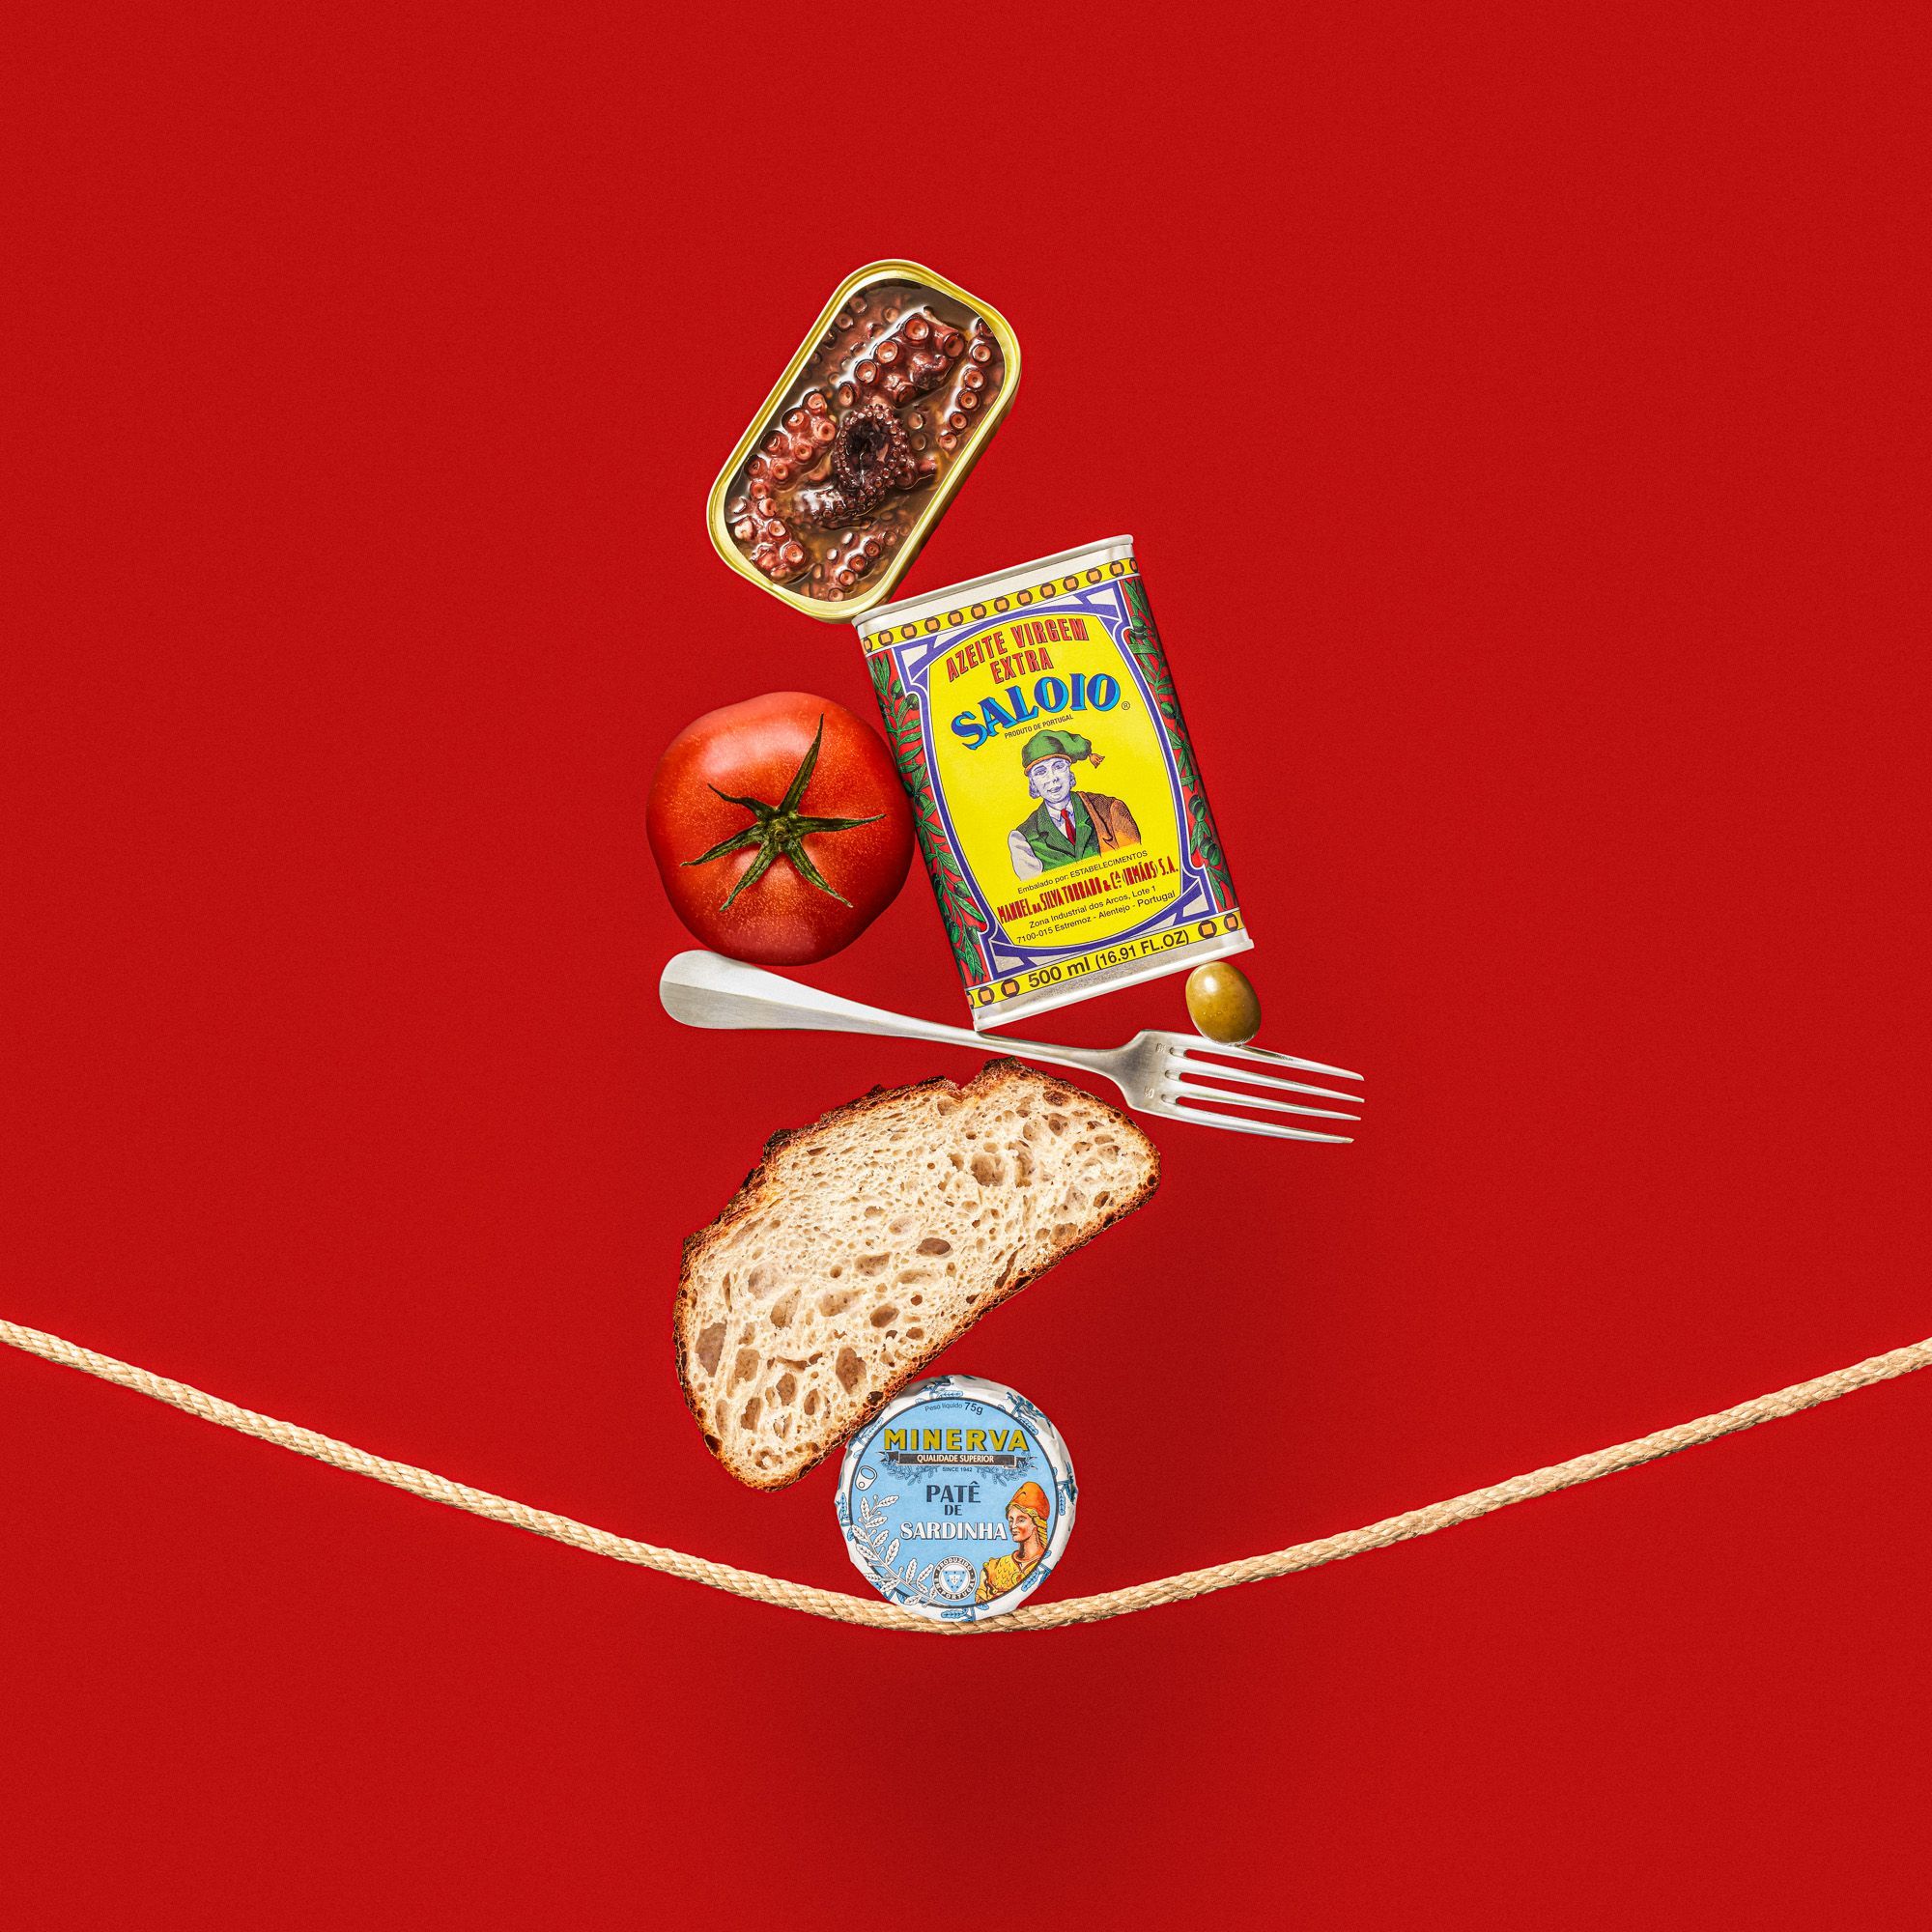 pate, a slice of bread, fork, olive, olive oil, tomato, and a can of octopus balancing on a string